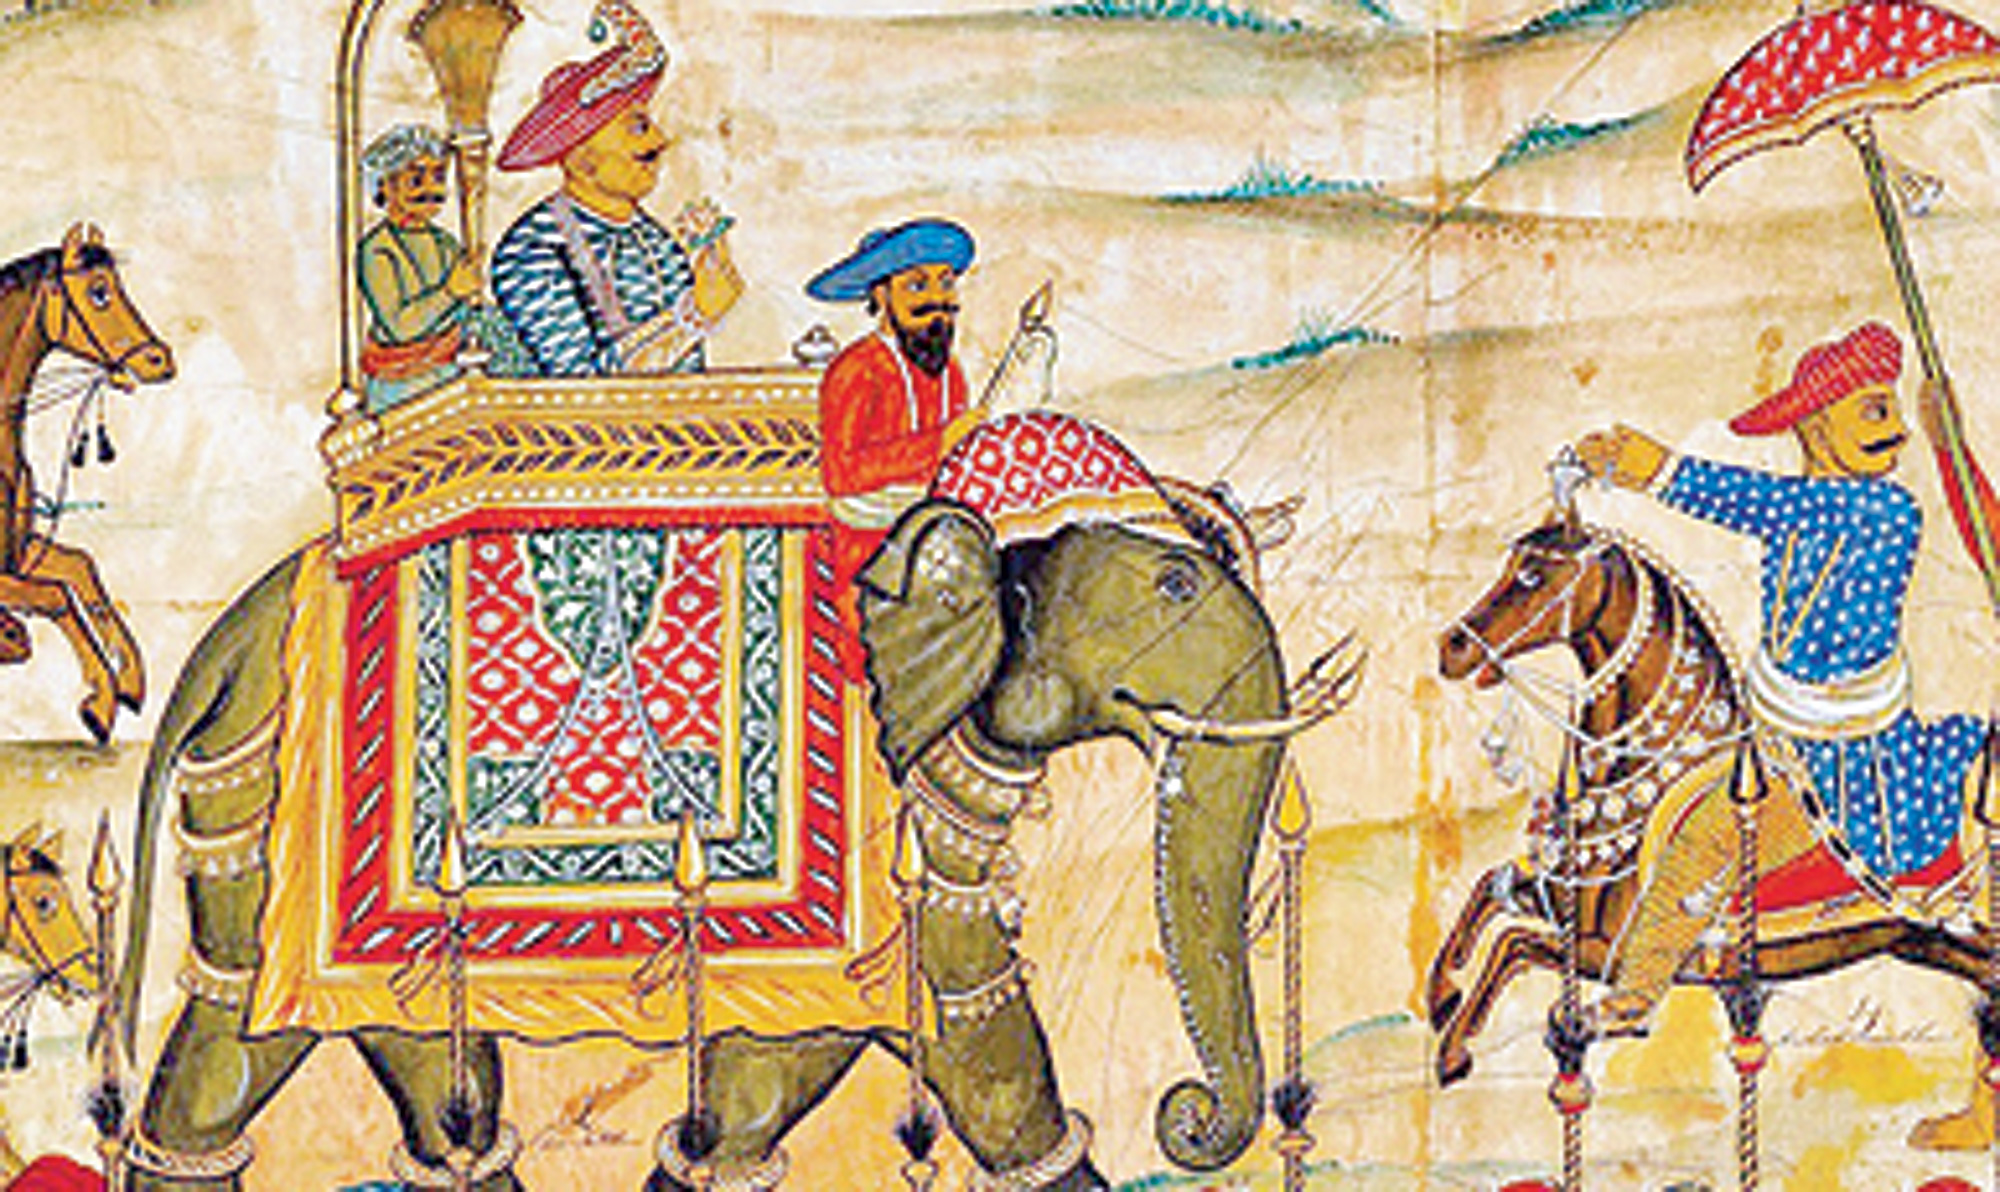 Tipu Sultan's commander: Lost in history, found in fiction ...